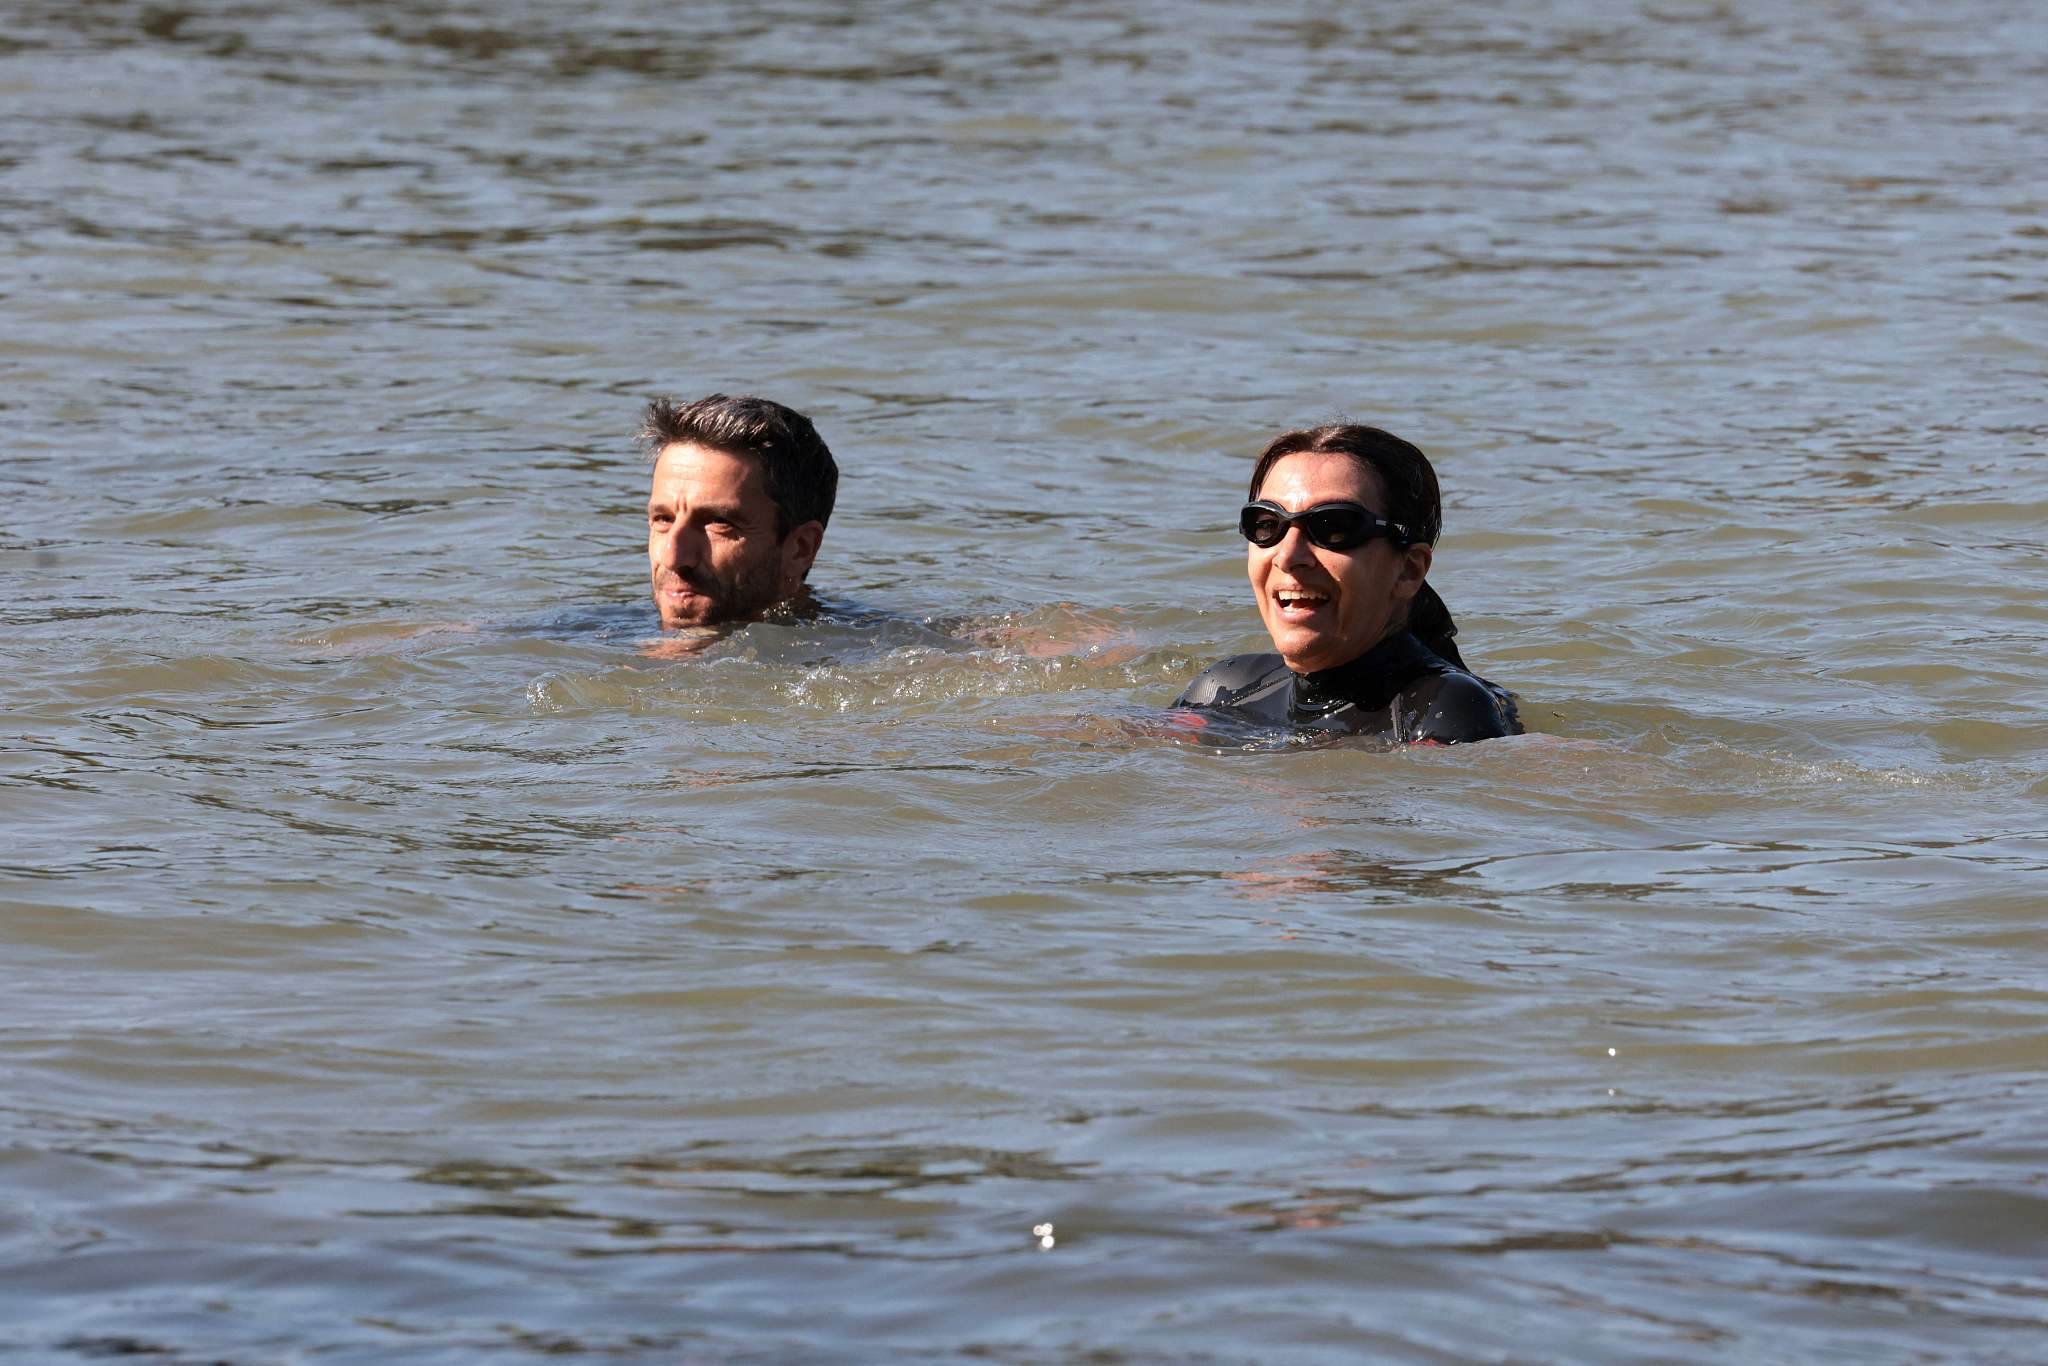 Anne Hidalgo (R), mayor of Paris, and Tony Estanguet, president of the Paris 2024 Organizing Committee for the Olympic and Paralympic Games swim in the River Seine in Paris, France, July 17, 2024. /CFP